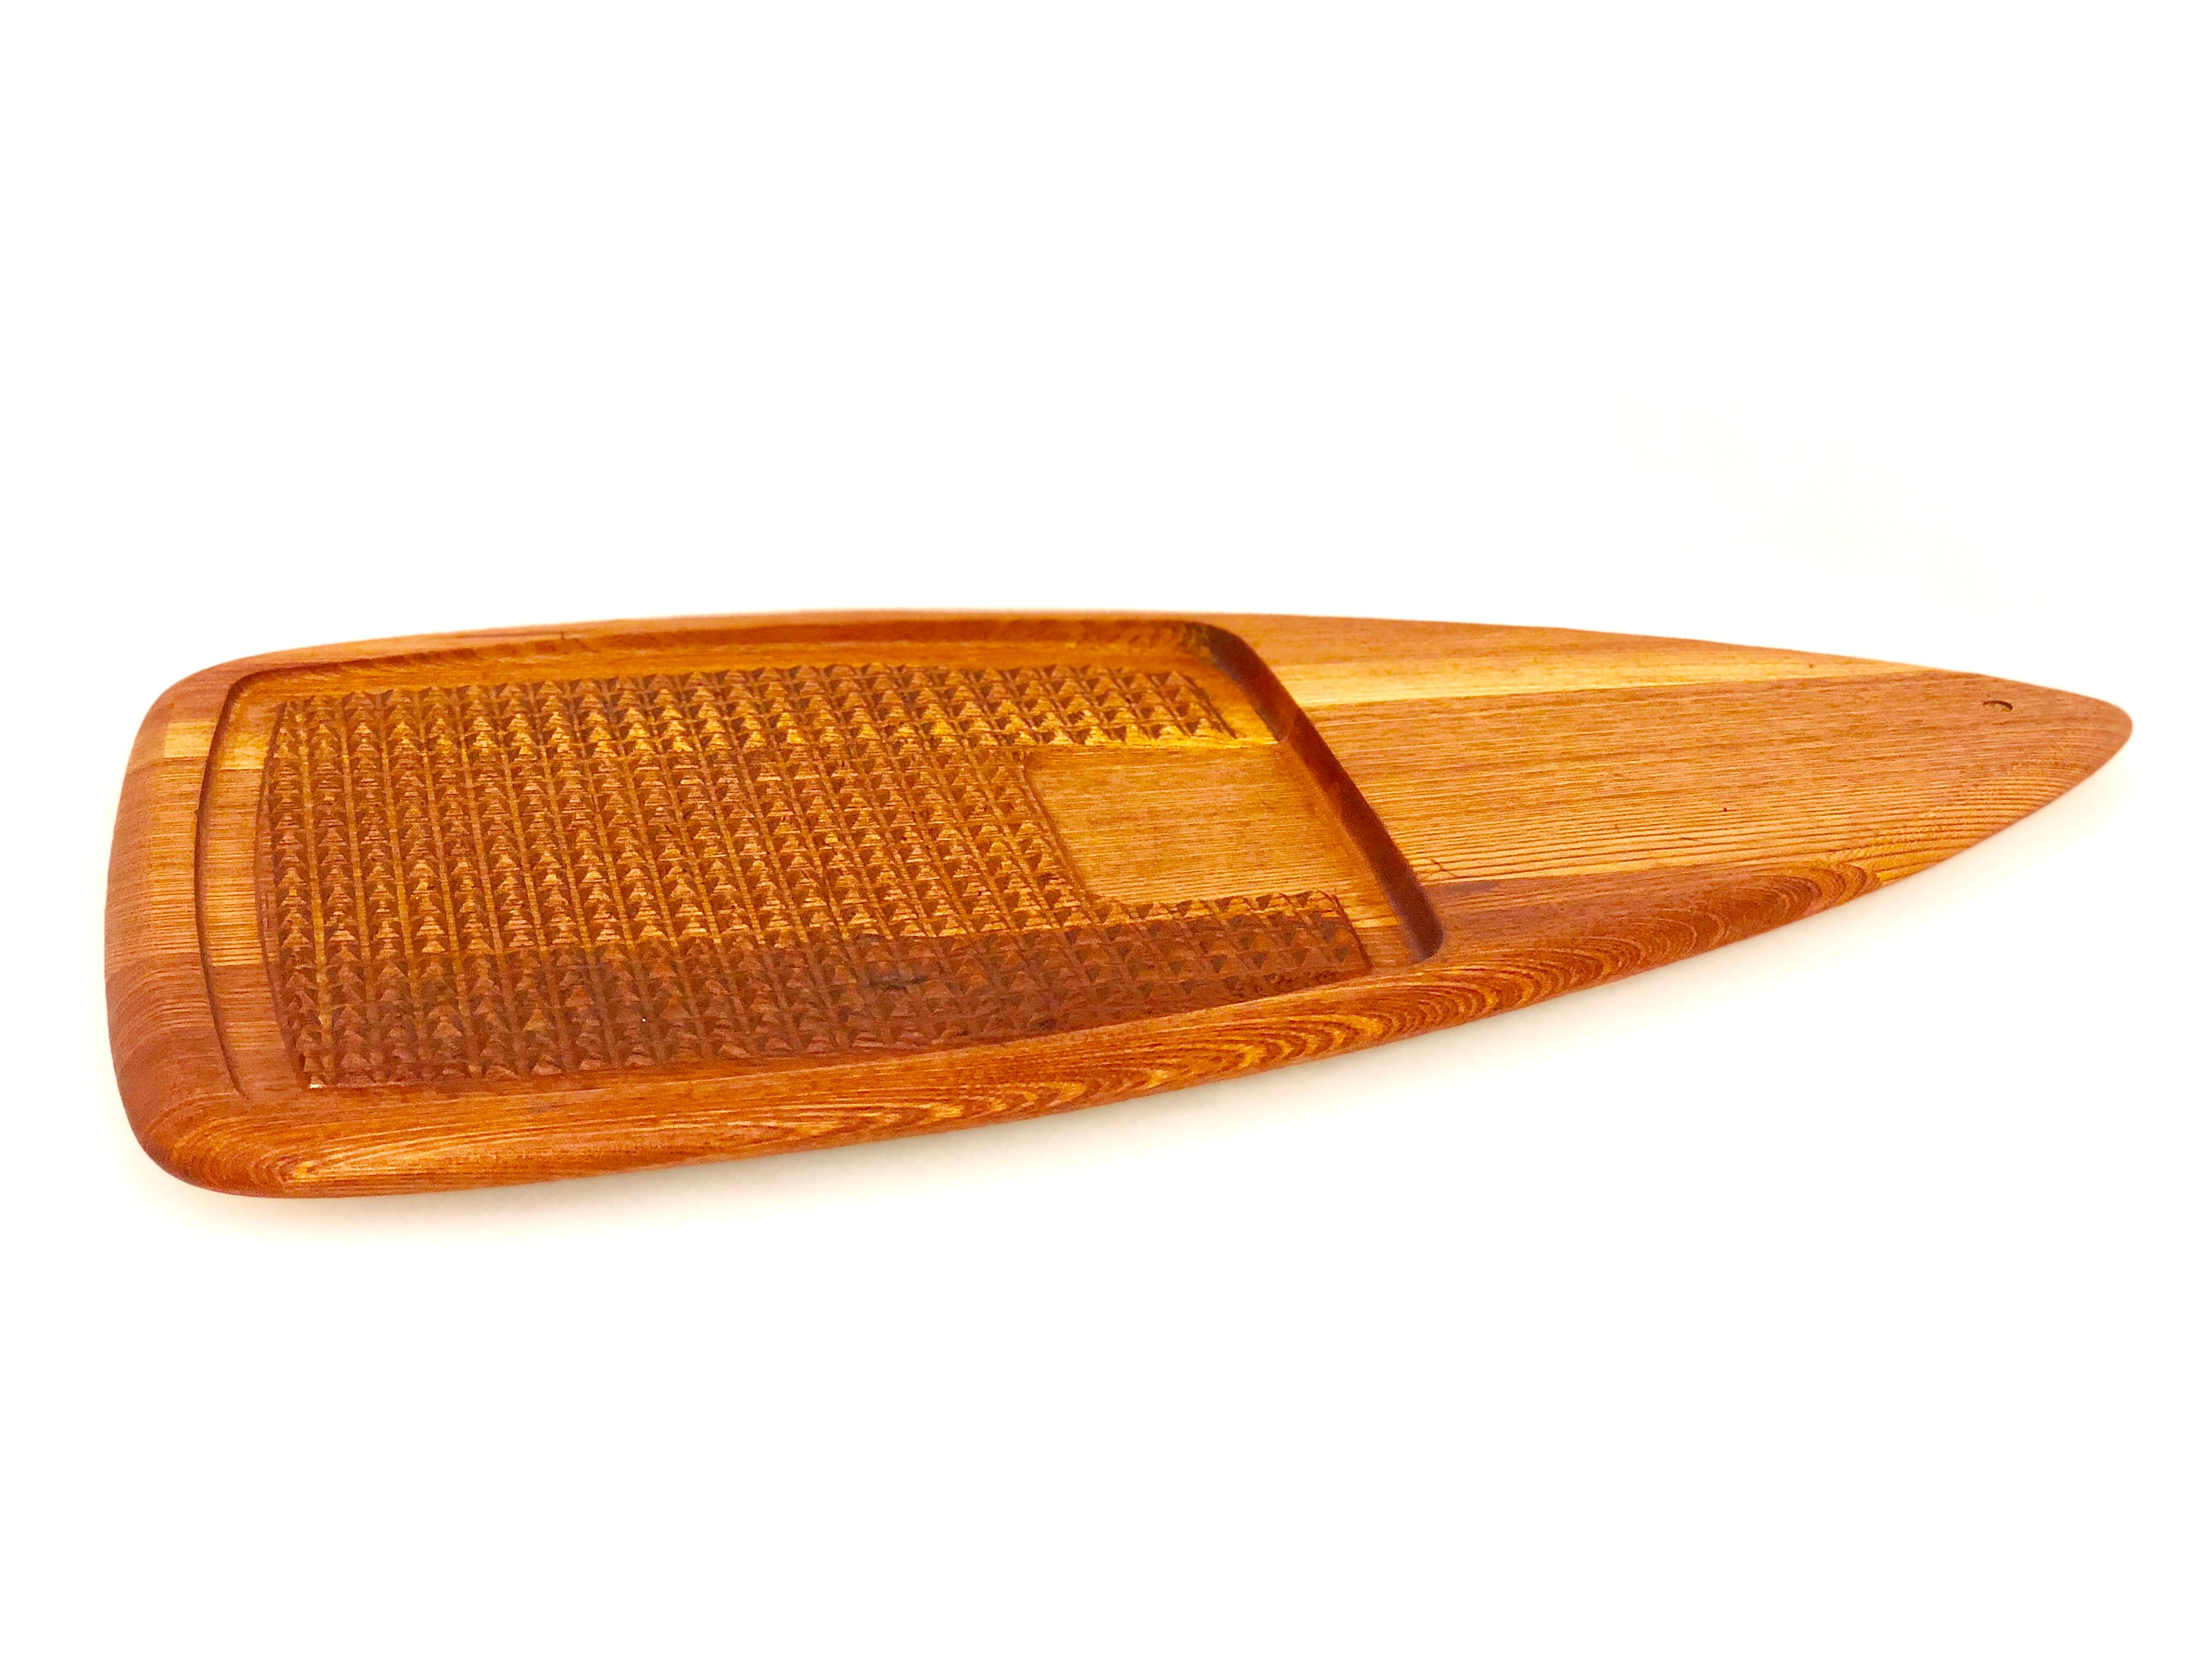 Beautiful solid teak surfboard style cutting board, freshly refinished with a hole to hang on the wall freshly sanded and refinished, nice large size with area for putting meats and drain the juices.